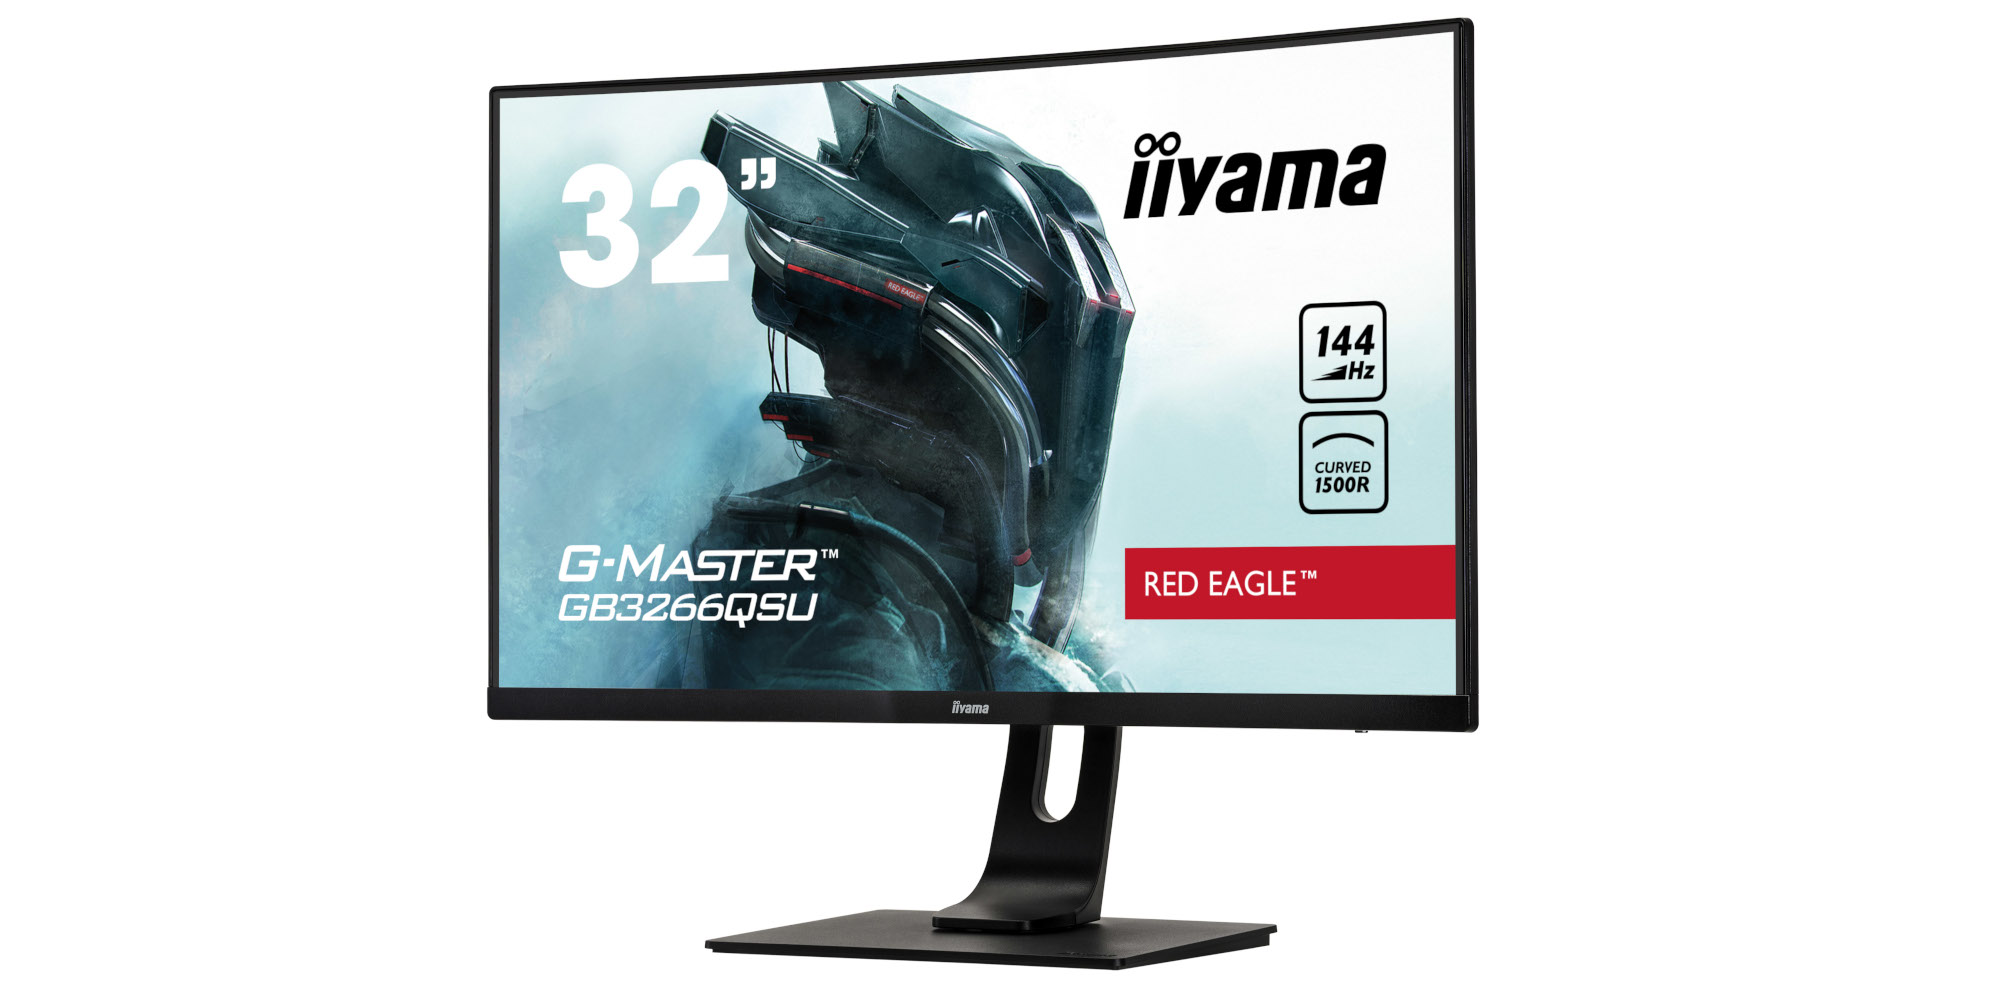 Iiyama Announces Red Eagle 1440p 144Hz Curved Gaming Monitor | Blur